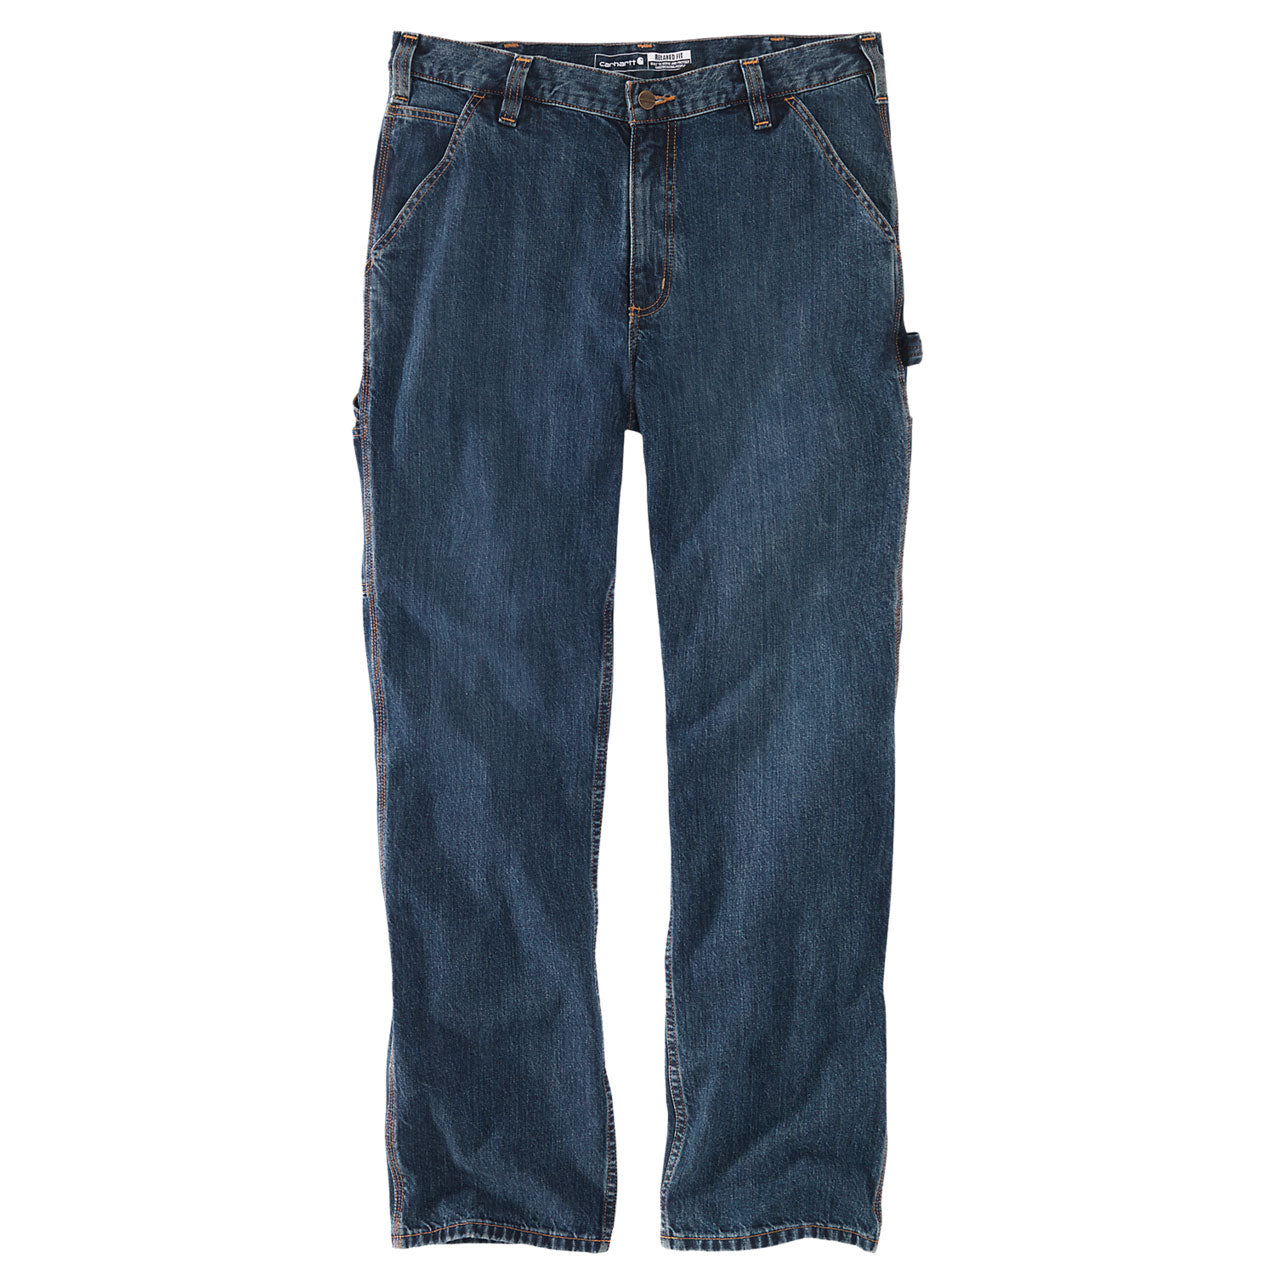 LOOSE FIT UTILITY JEAN Canal